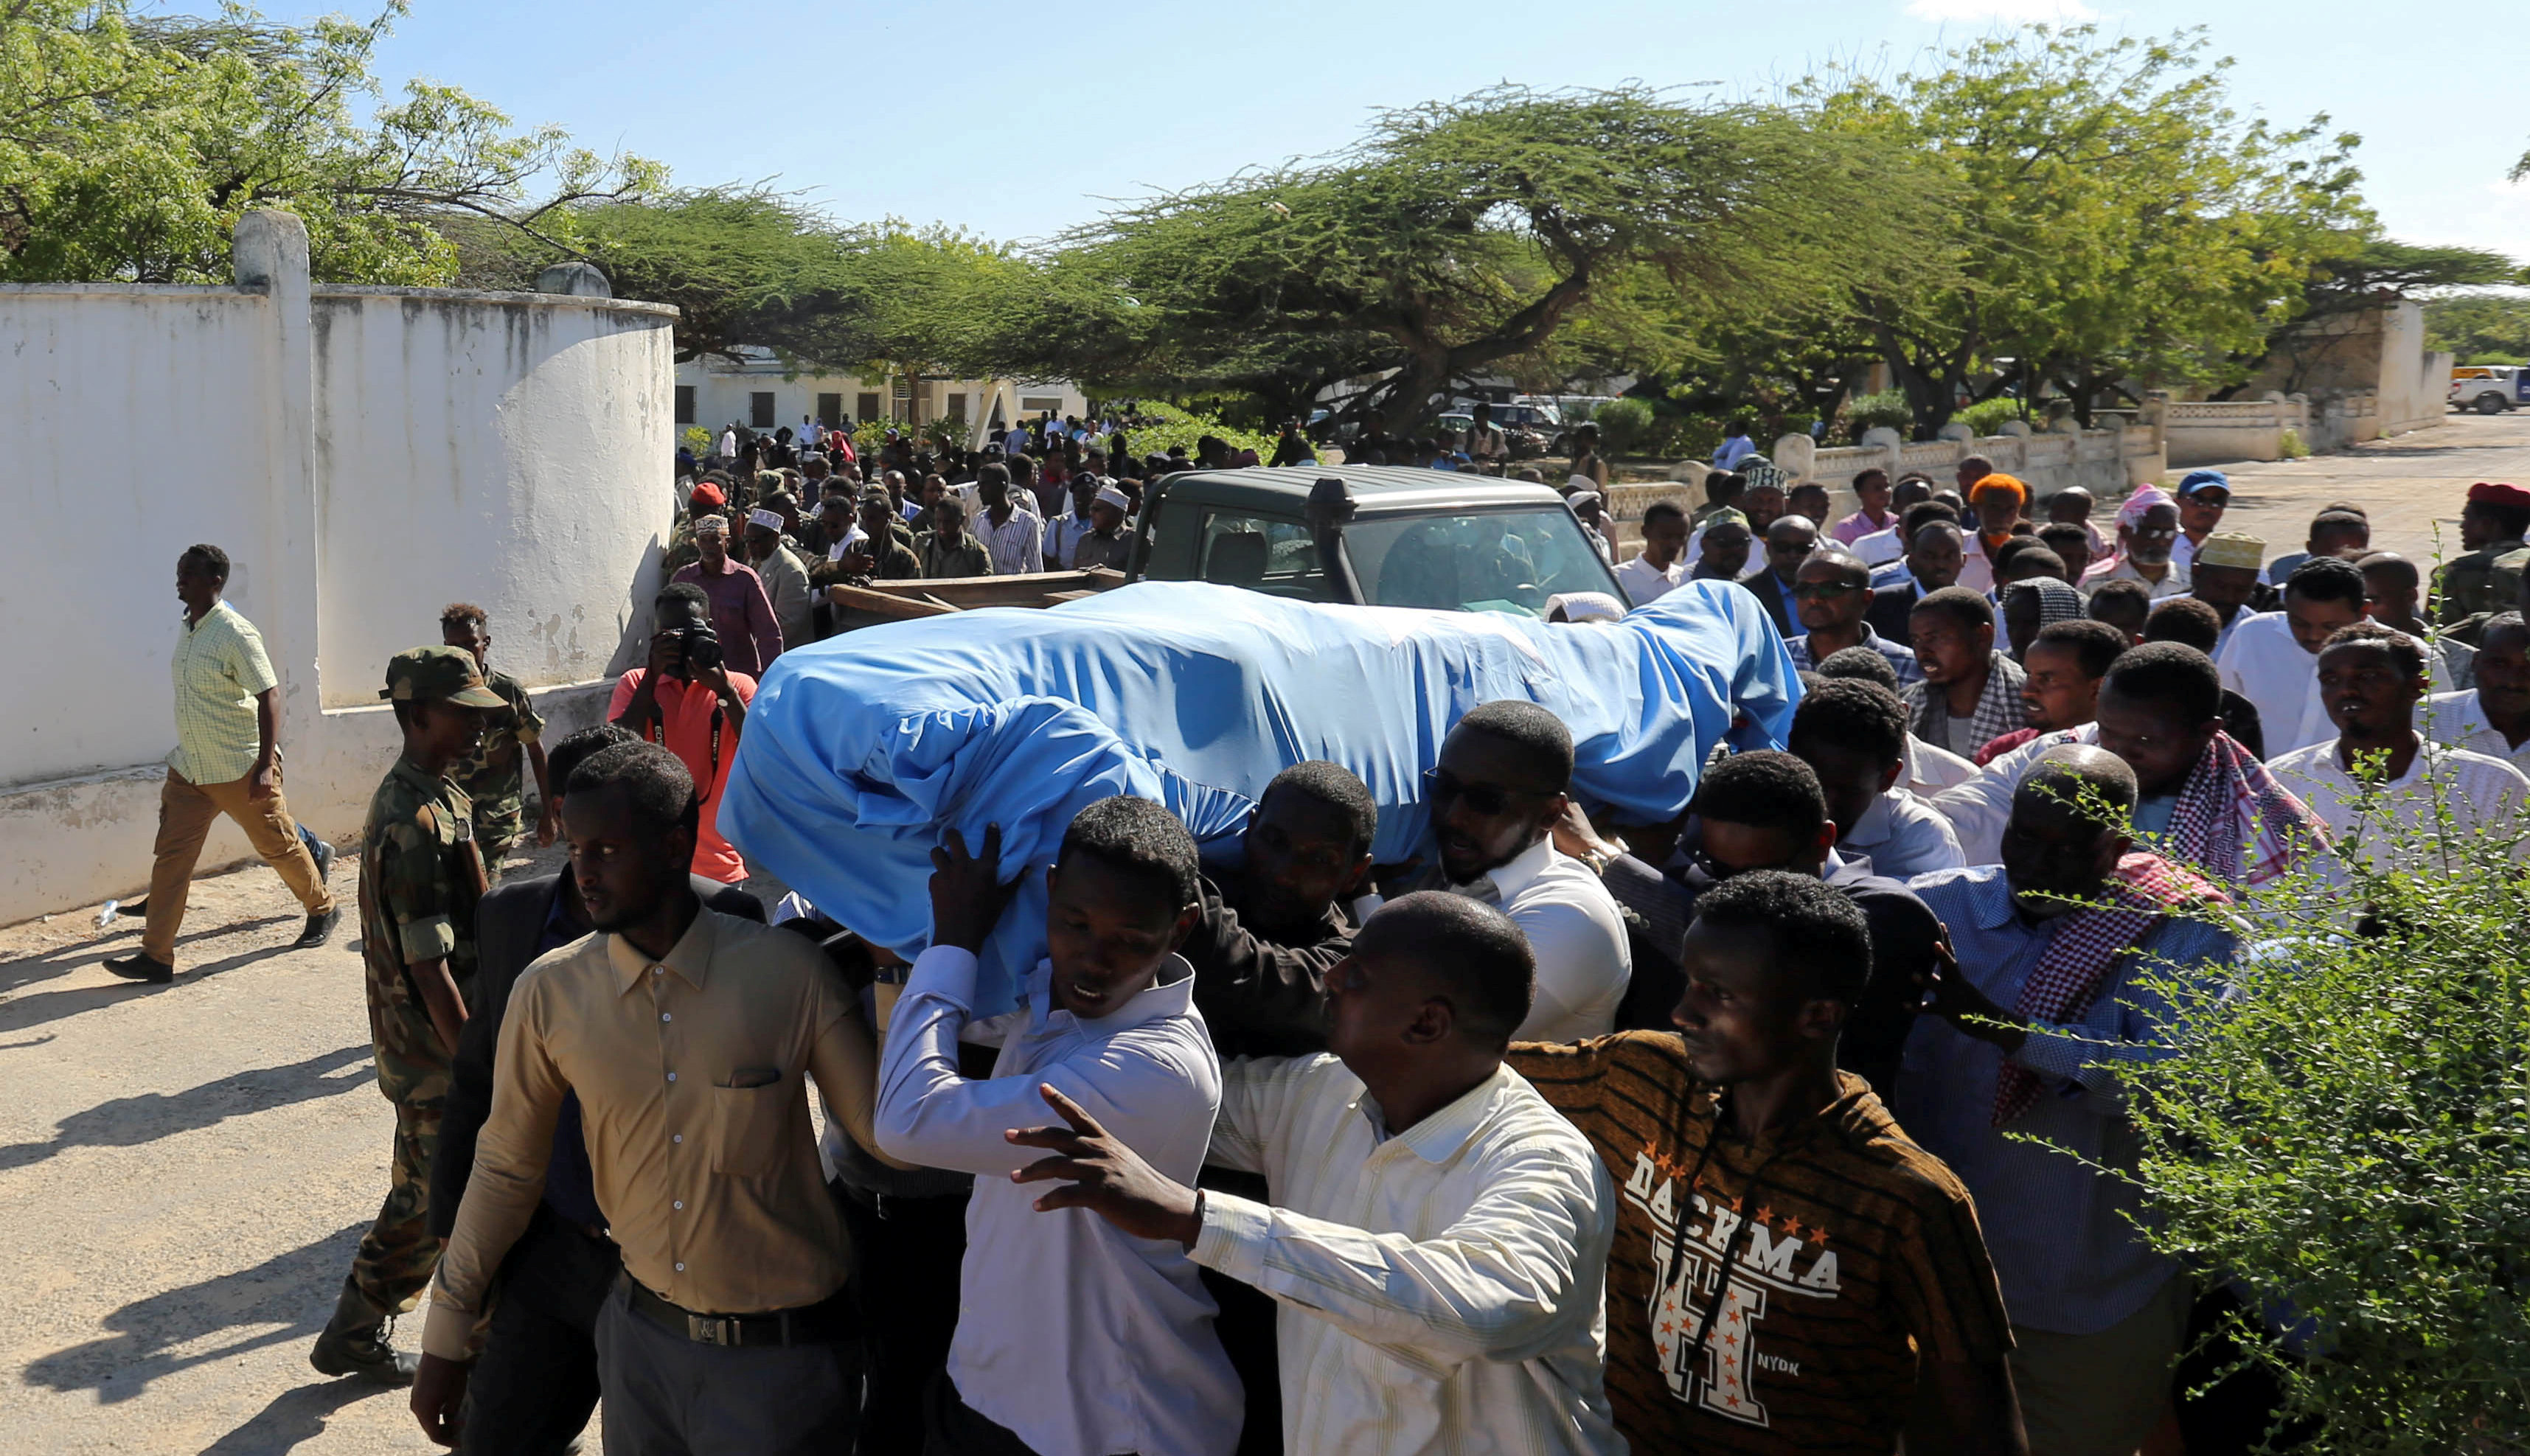 Relatives carry the body of Somalia's public works minister who was shot and killed in the capital Mogadishu, Somalia May 4, 2017. (Feisal Omar—Reuters)